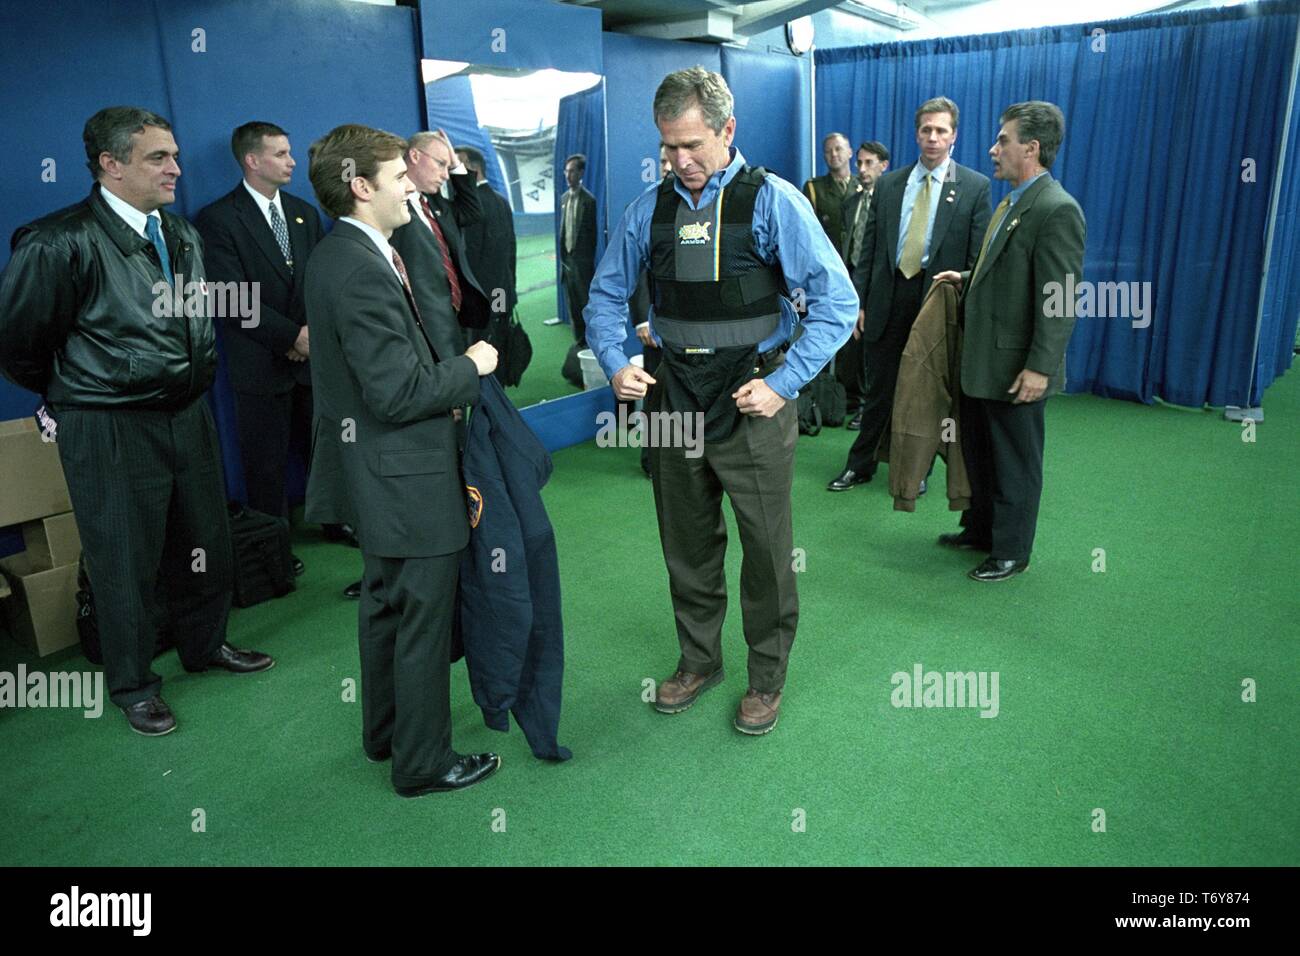 President George W Bush puts on a protective vest prior to throwing out the ceremonial first pitch in Game Three of the World Series between the Arizona Diamondbacks and the New York Yankees, Yankee Stadium in New York City, October 30, 2001. Courtesy National Archives. () Stock Photo